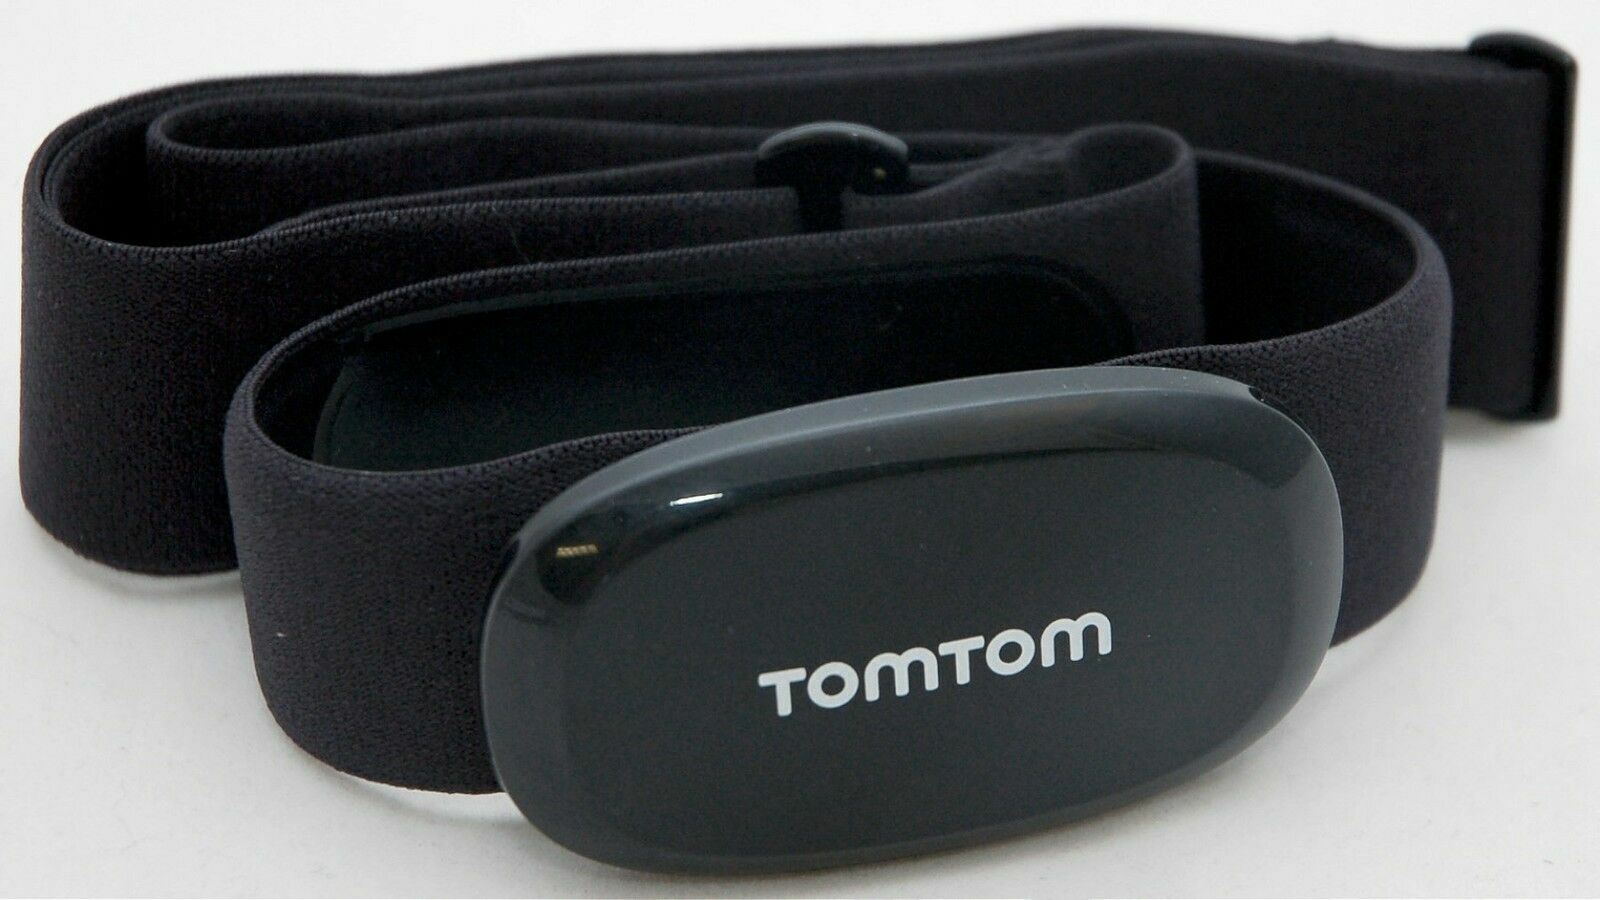 Primary image for NEW TomTom Multi-Sport Runner Bluetooth Heart Rate Monitor Sensor for GPS watch